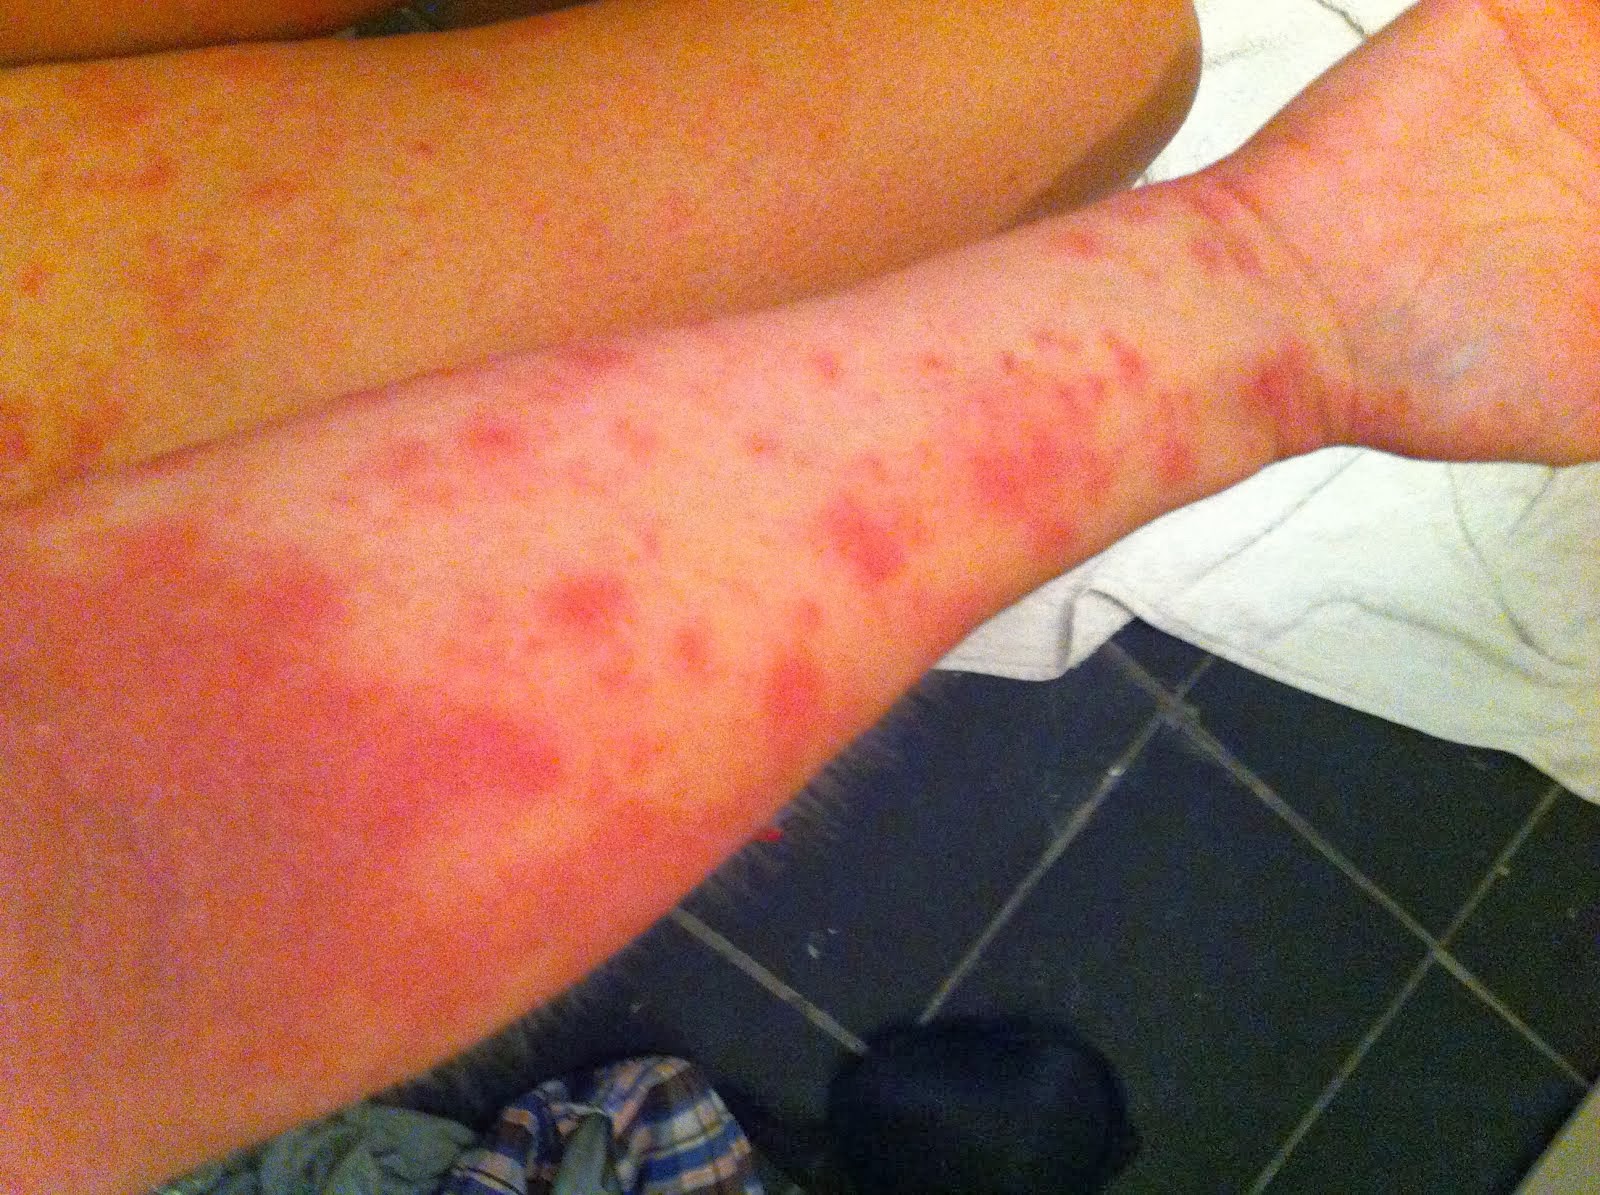 My Eczema Pictures - The first